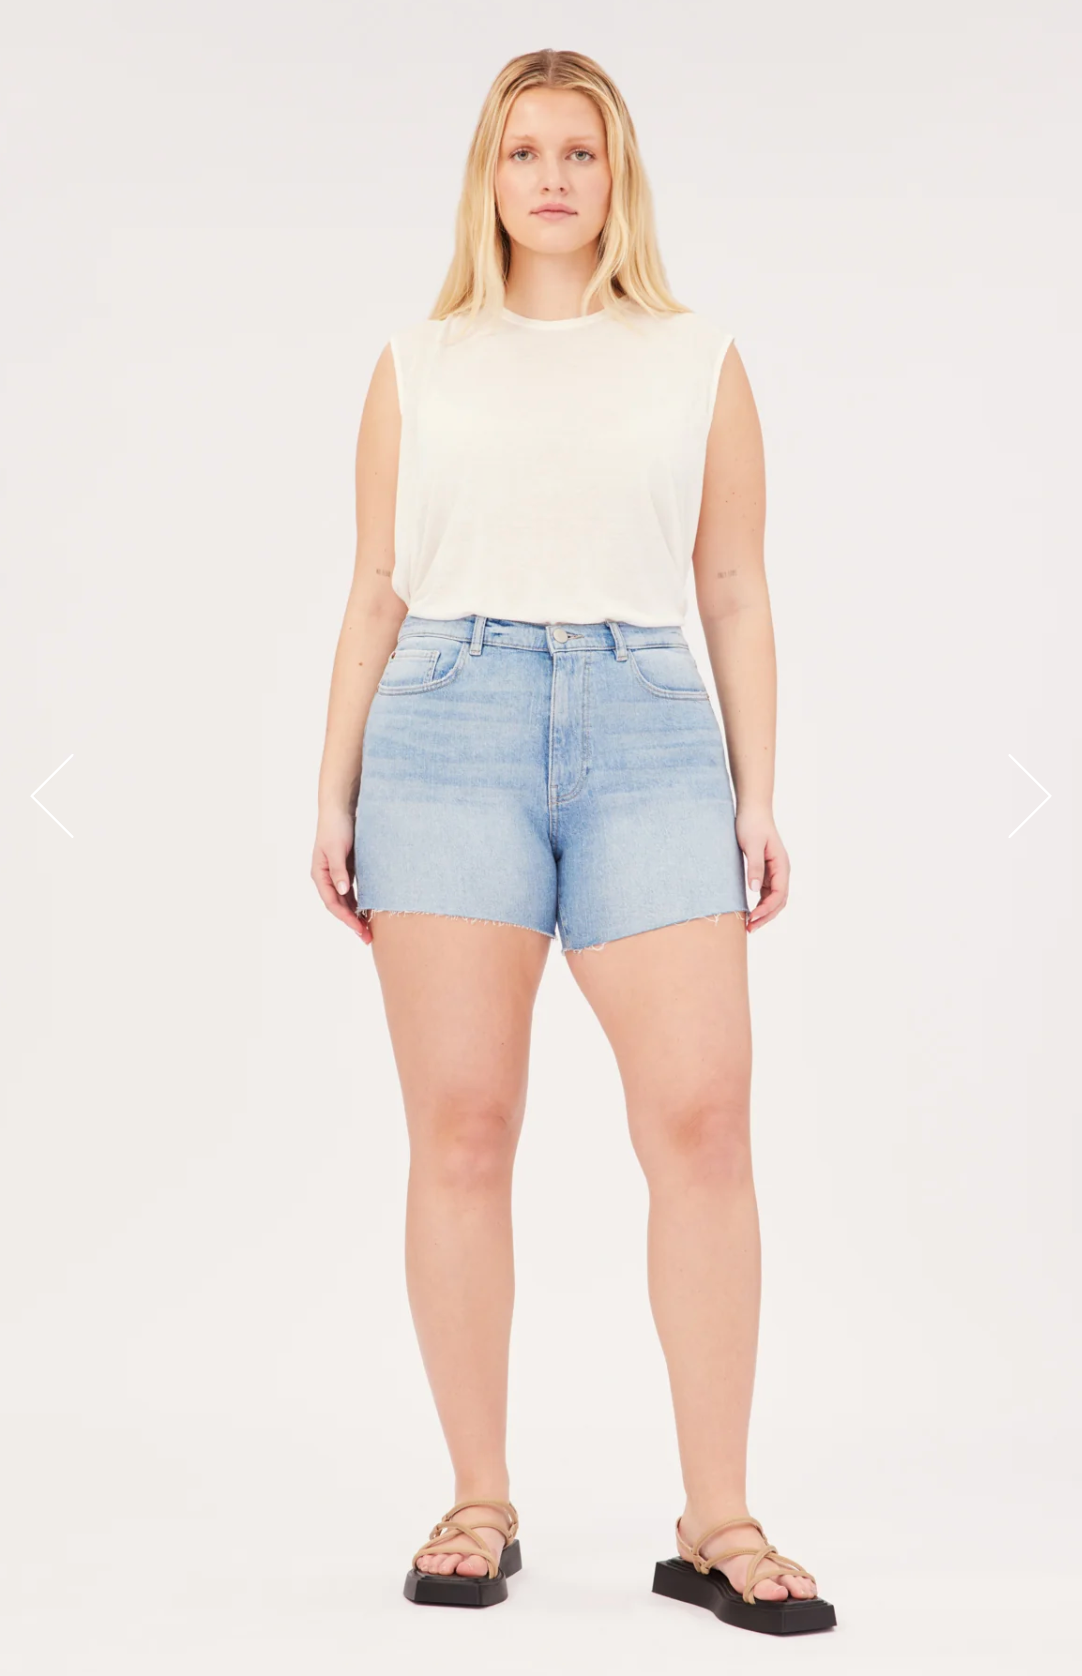 Topshop Moto Short Overalls | Nordstrom | Clothes, Outfits, Fashion outfits